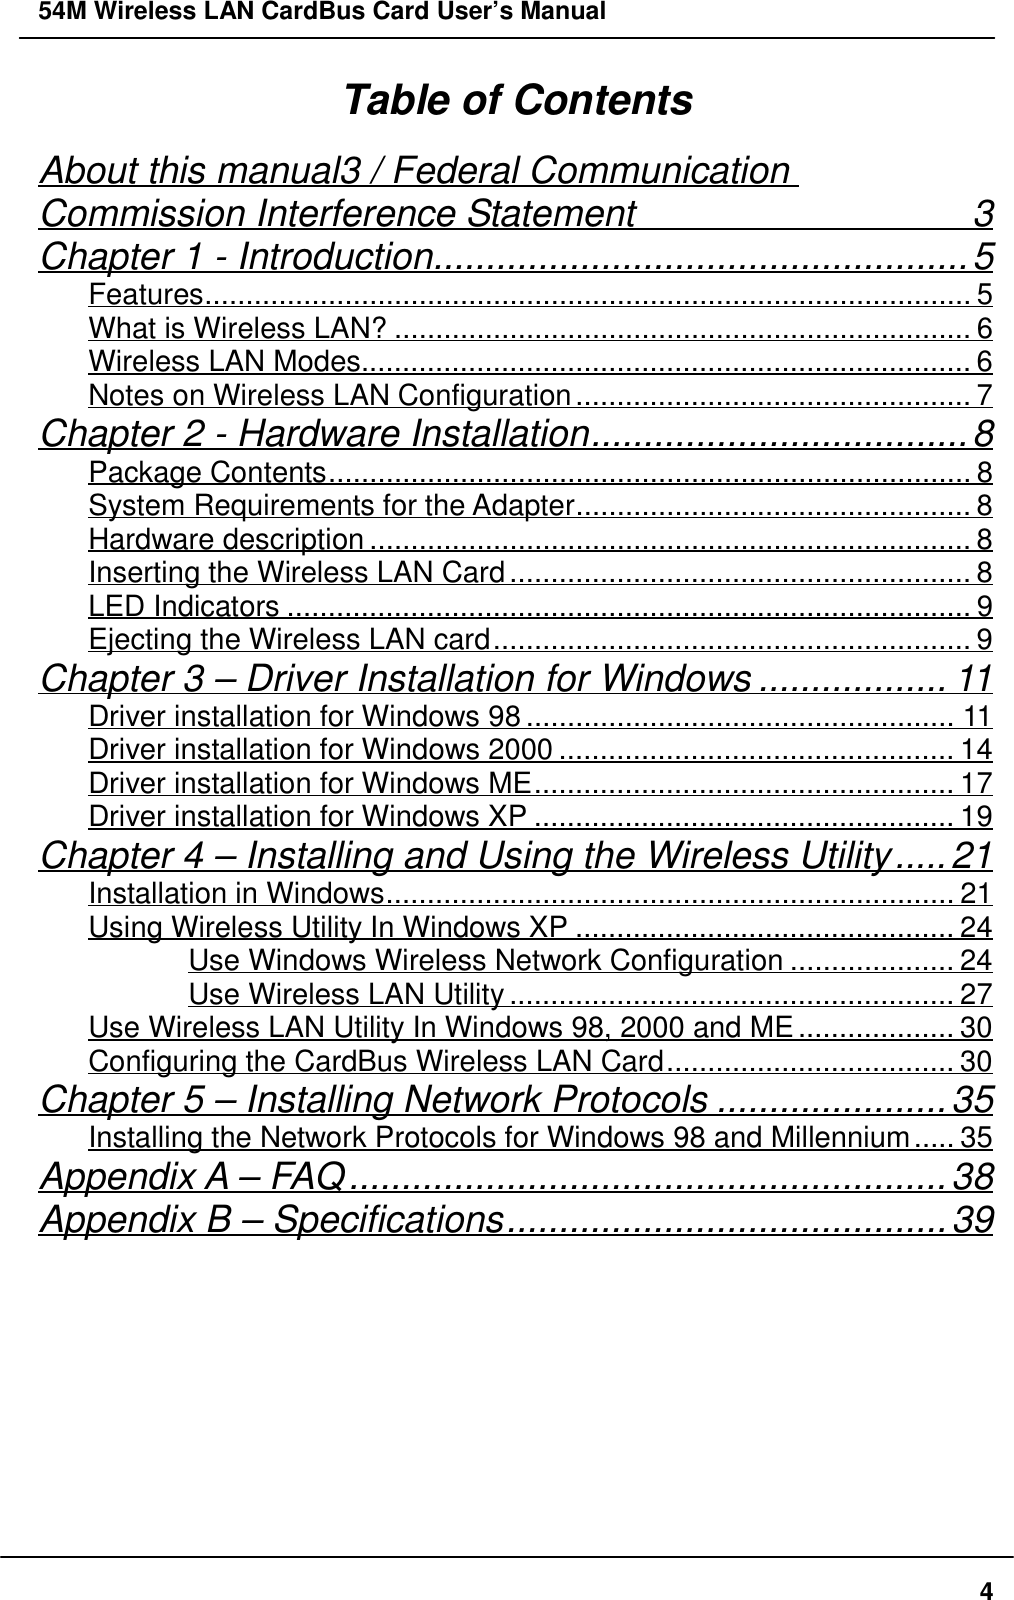 54M Wireless LAN CardBus Card User’s Manual4Table of ContentsAbout this manual3 / Federal CommunicationCommission Interference Statement                  3Chapter 1 - Introduction...................................................5Features............................................................................................. 5What is Wireless LAN? ...................................................................... 6Wireless LAN Modes.......................................................................... 6Notes on Wireless LAN Configuration................................................ 7Chapter 2 - Hardware Installation....................................8Package Contents.............................................................................. 8System Requirements for the Adapter................................................ 8Hardware description ......................................................................... 8Inserting the Wireless LAN Card........................................................ 8LED Indicators ................................................................................... 9Ejecting the Wireless LAN card.......................................................... 9Chapter 3 – Driver Installation for Windows .................. 11Driver installation for Windows 98.................................................... 11Driver installation for Windows 2000 ................................................ 14Driver installation for Windows ME................................................... 17Driver installation for Windows XP ................................................... 19Chapter 4 – Installing and Using the Wireless Utility.....21Installation in Windows..................................................................... 21Using Wireless Utility In Windows XP .............................................. 24Use Windows Wireless Network Configuration .................... 24Use Wireless LAN Utility ...................................................... 27Use Wireless LAN Utility In Windows 98, 2000 and ME................... 30Configuring the CardBus Wireless LAN Card................................... 30Chapter 5 – Installing Network Protocols ......................35Installing the Network Protocols for Windows 98 and Millennium..... 35Appendix A – FAQ.........................................................38Appendix B – Specifications..........................................39